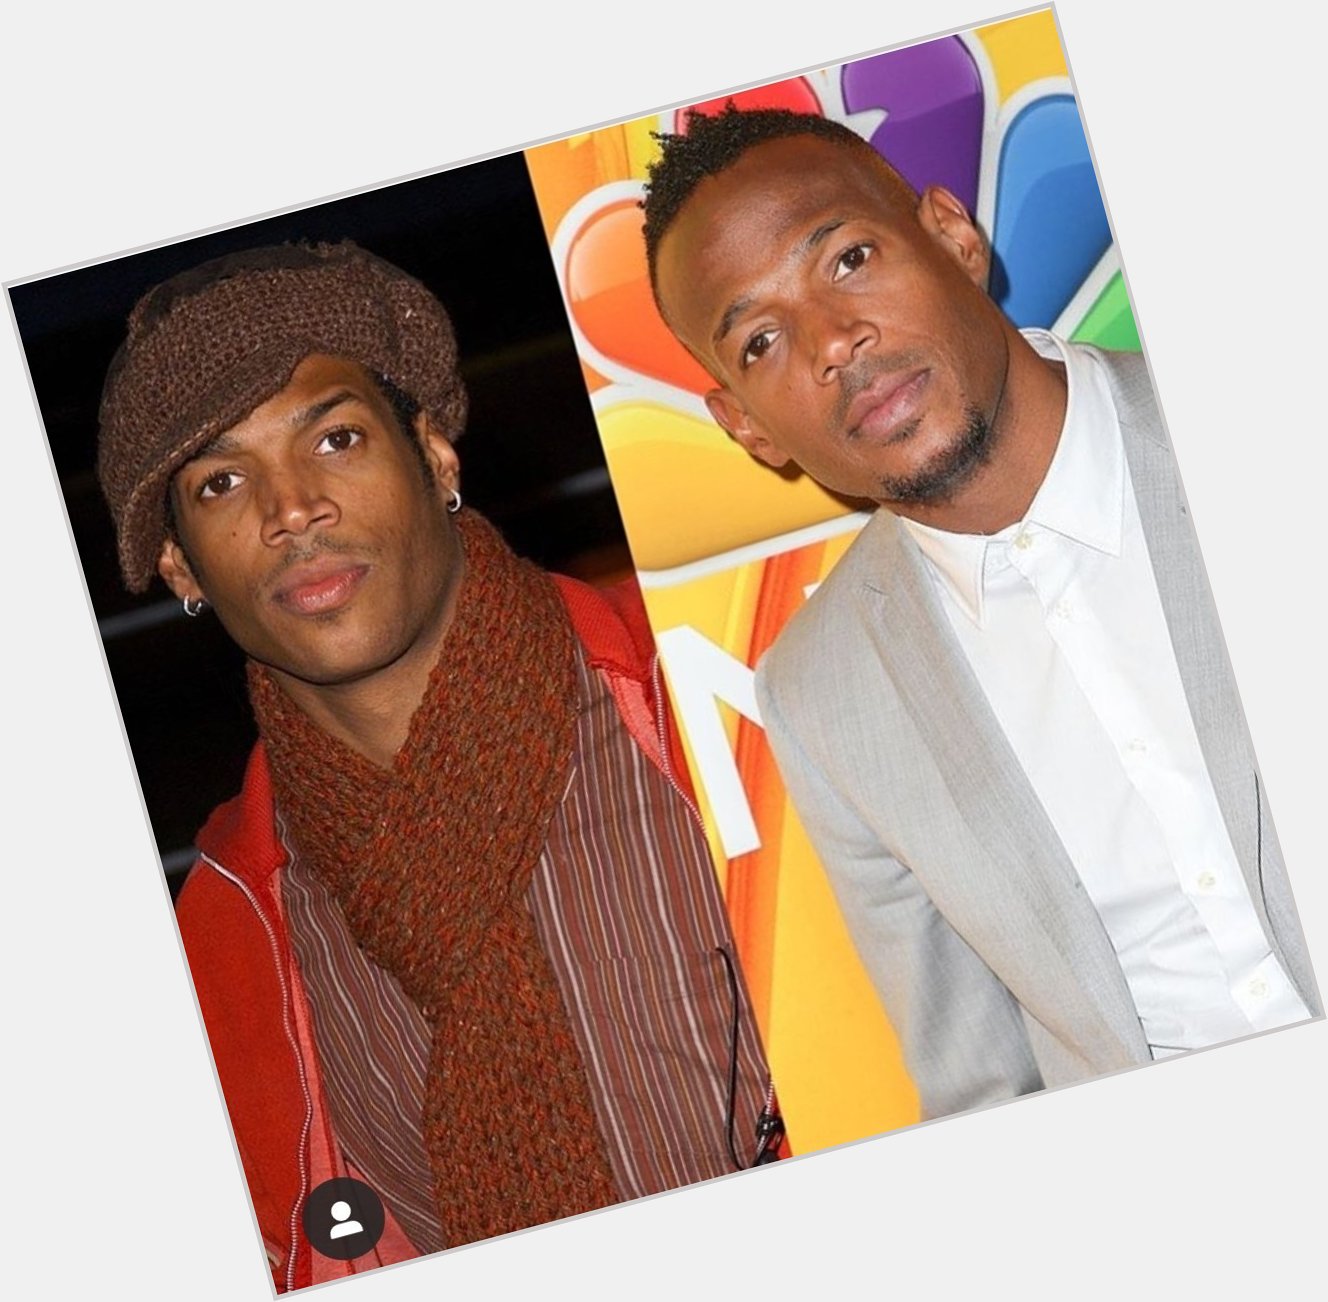 Happy 47th bday, Marlon Wayans.
These pics are 14 yrs apart. 